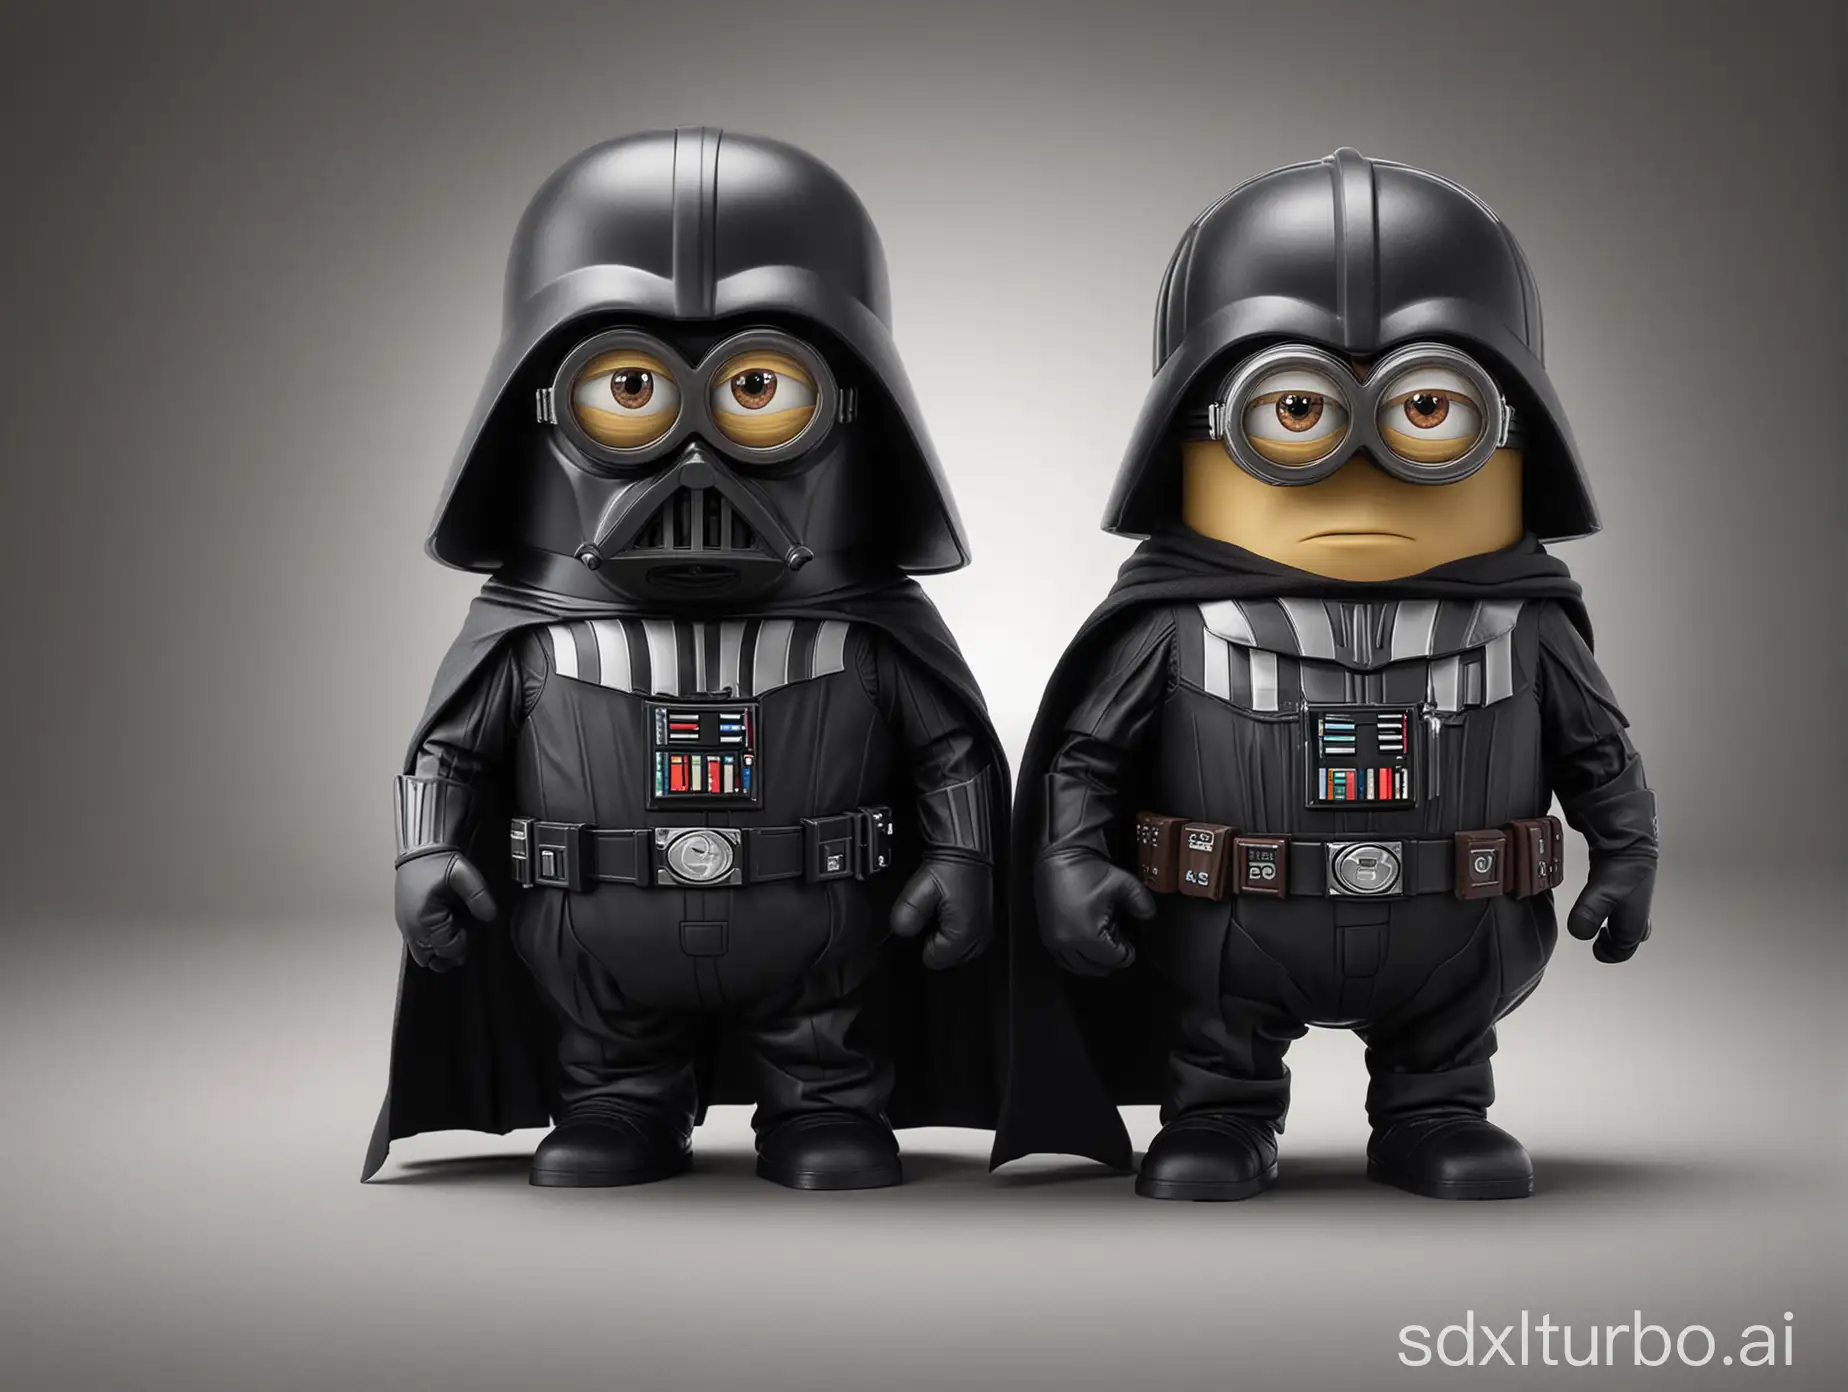 a minion in Darth Vader costume next to a Darth Vader in minion costume